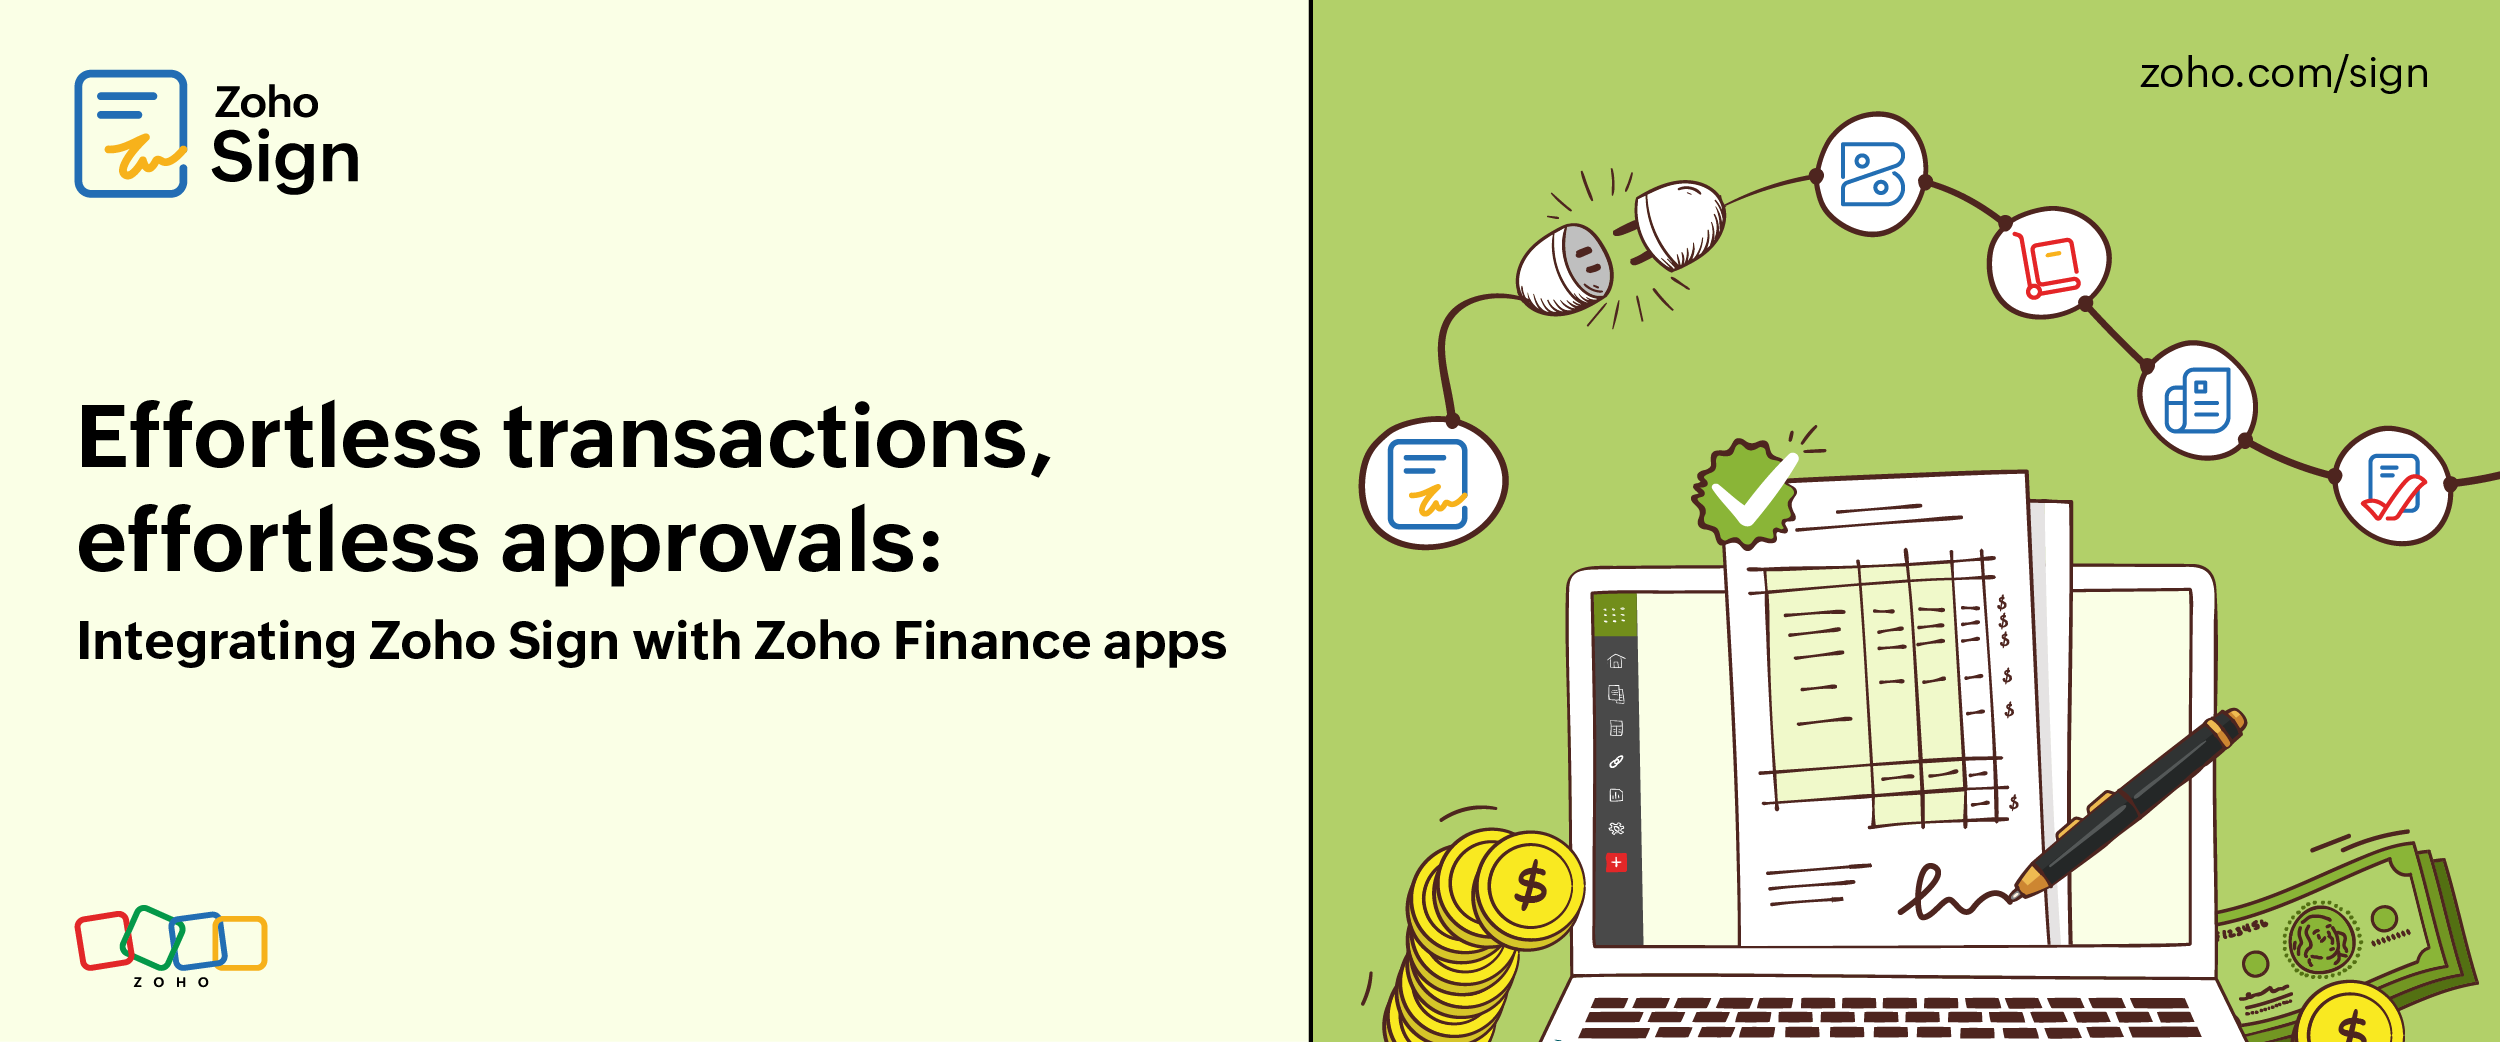 Effortless transactions, effortless approvals: Integrating Zoho Sign with Zoho Finance apps